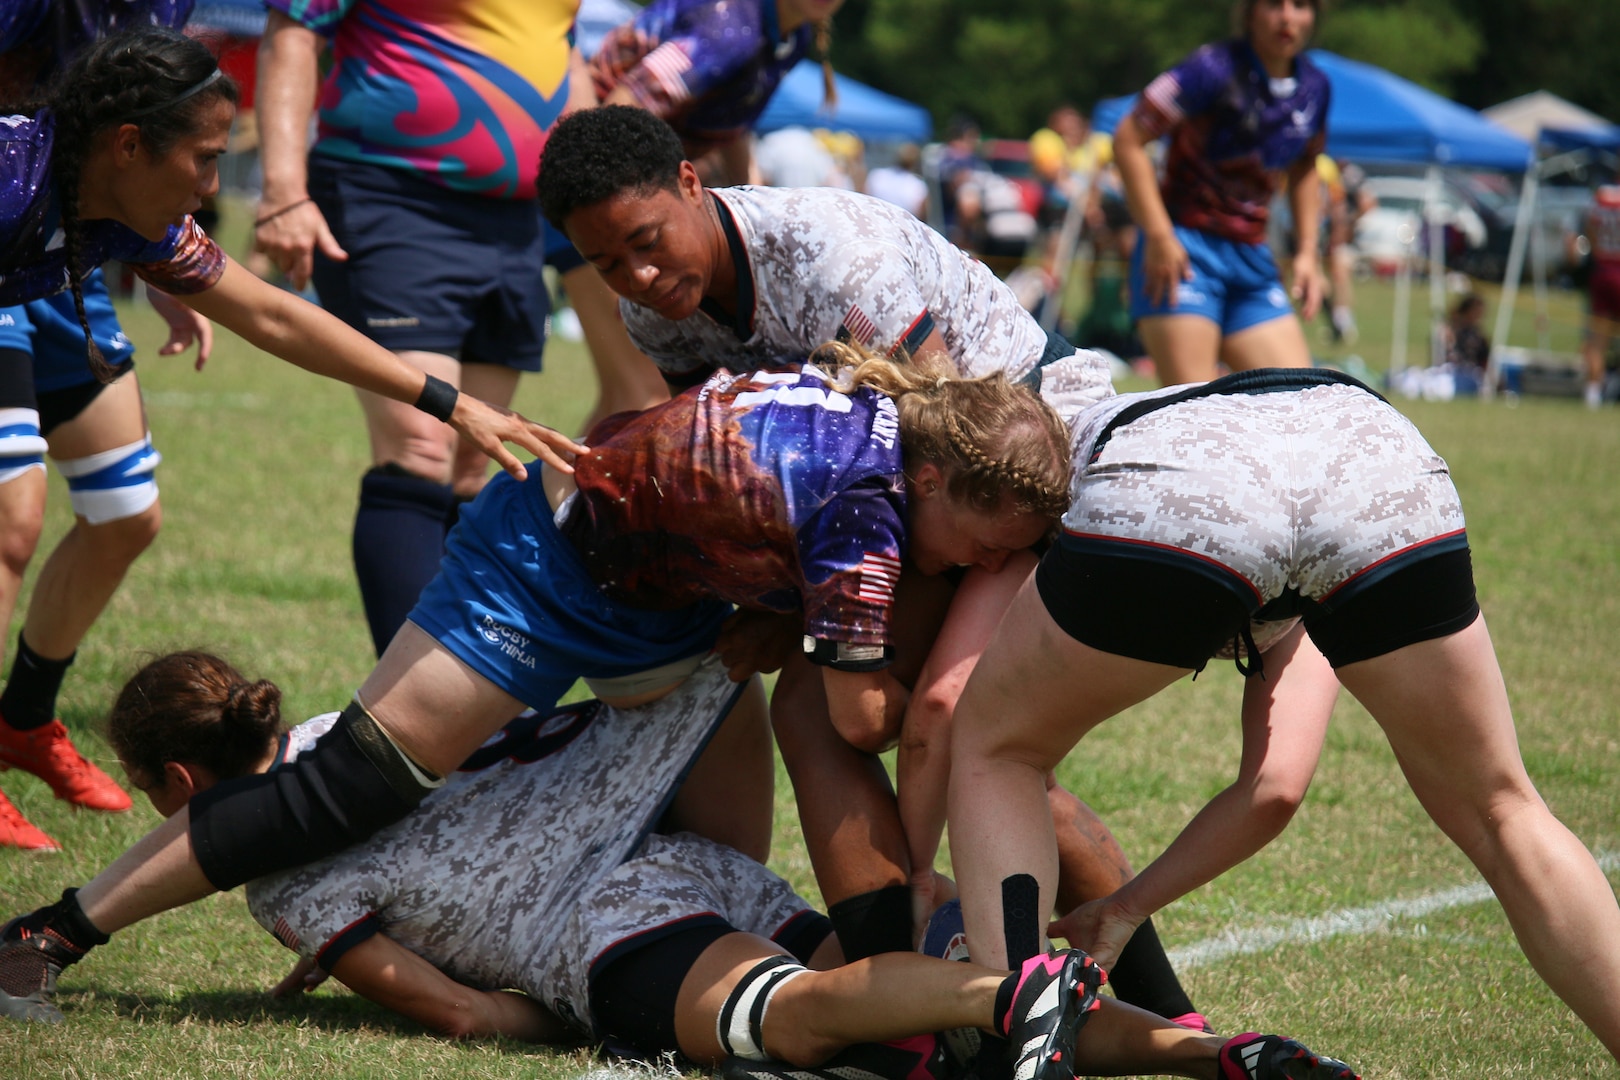 2023 Armed Forces Sports Women's Rugby Championship held in conjunction with the Cape Fear 7's Rugby Tournament in Wilmington, N.C.  Championship features teams from the Army, Marine Corps, Navy, Air Force (with Space Force players), and Coast Guard.  (Dept. of Defense Photo by Mr. Steven Dinote, Released)